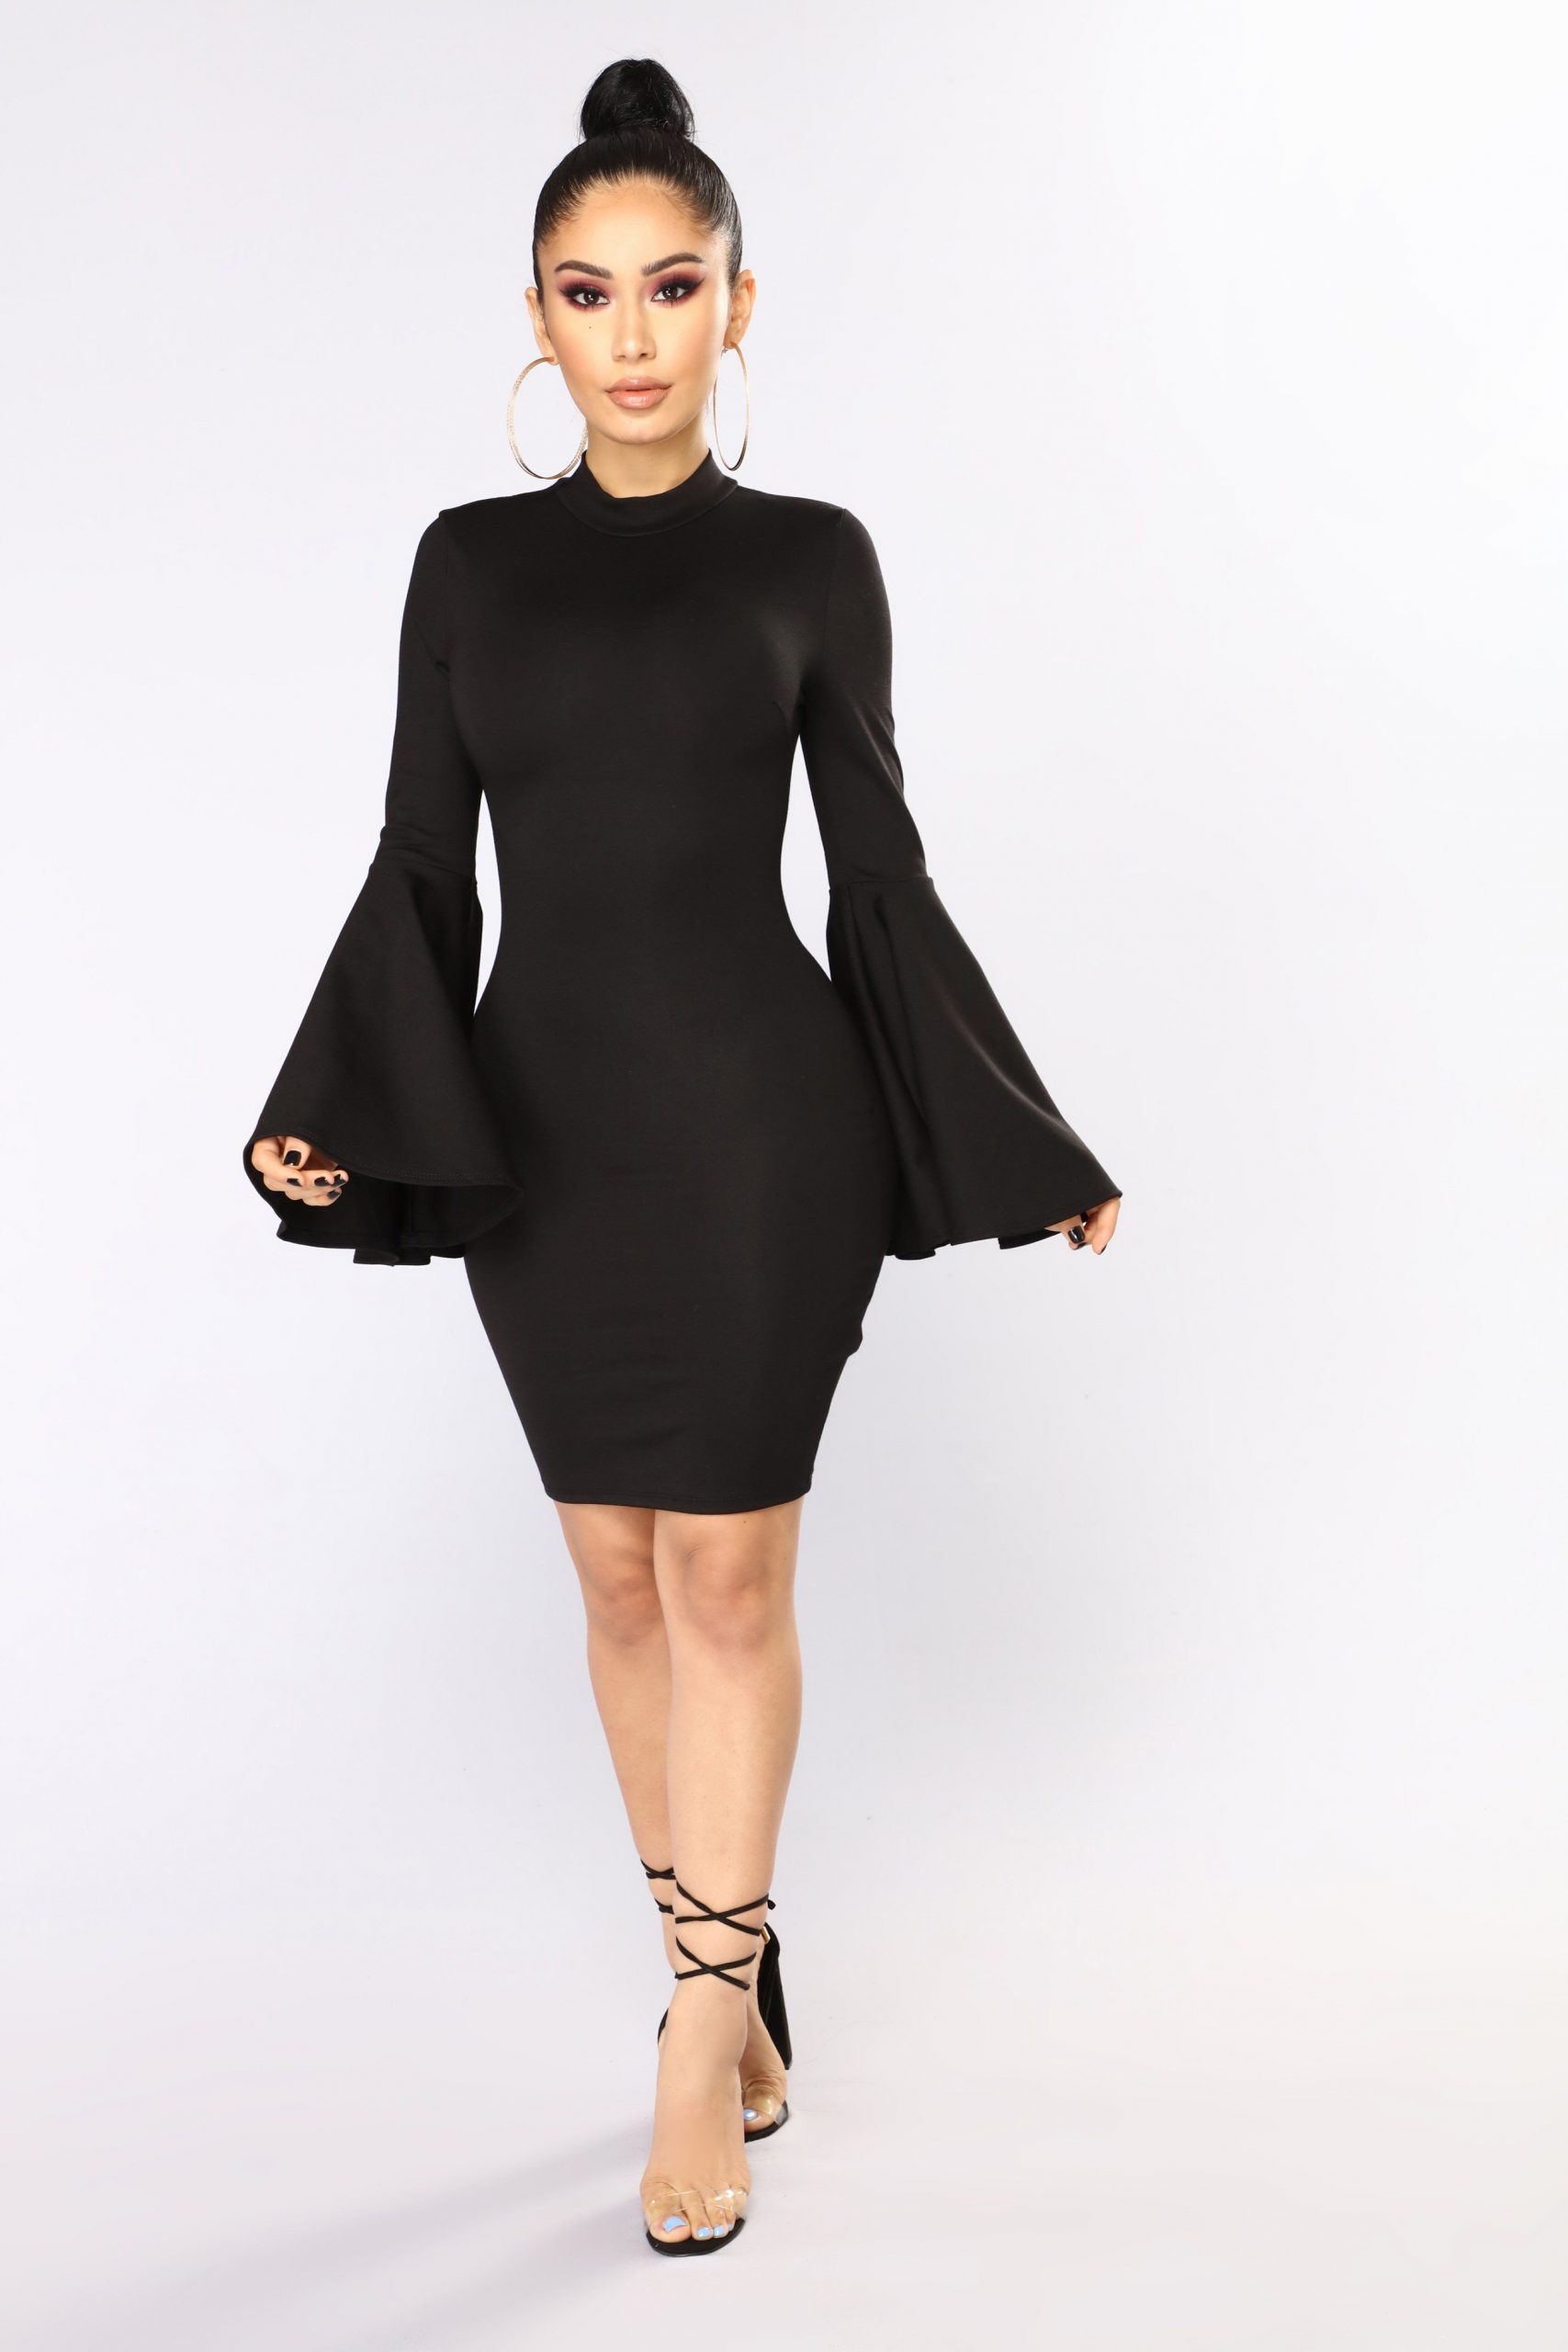 Black Bell Sleeve Dress Outfits